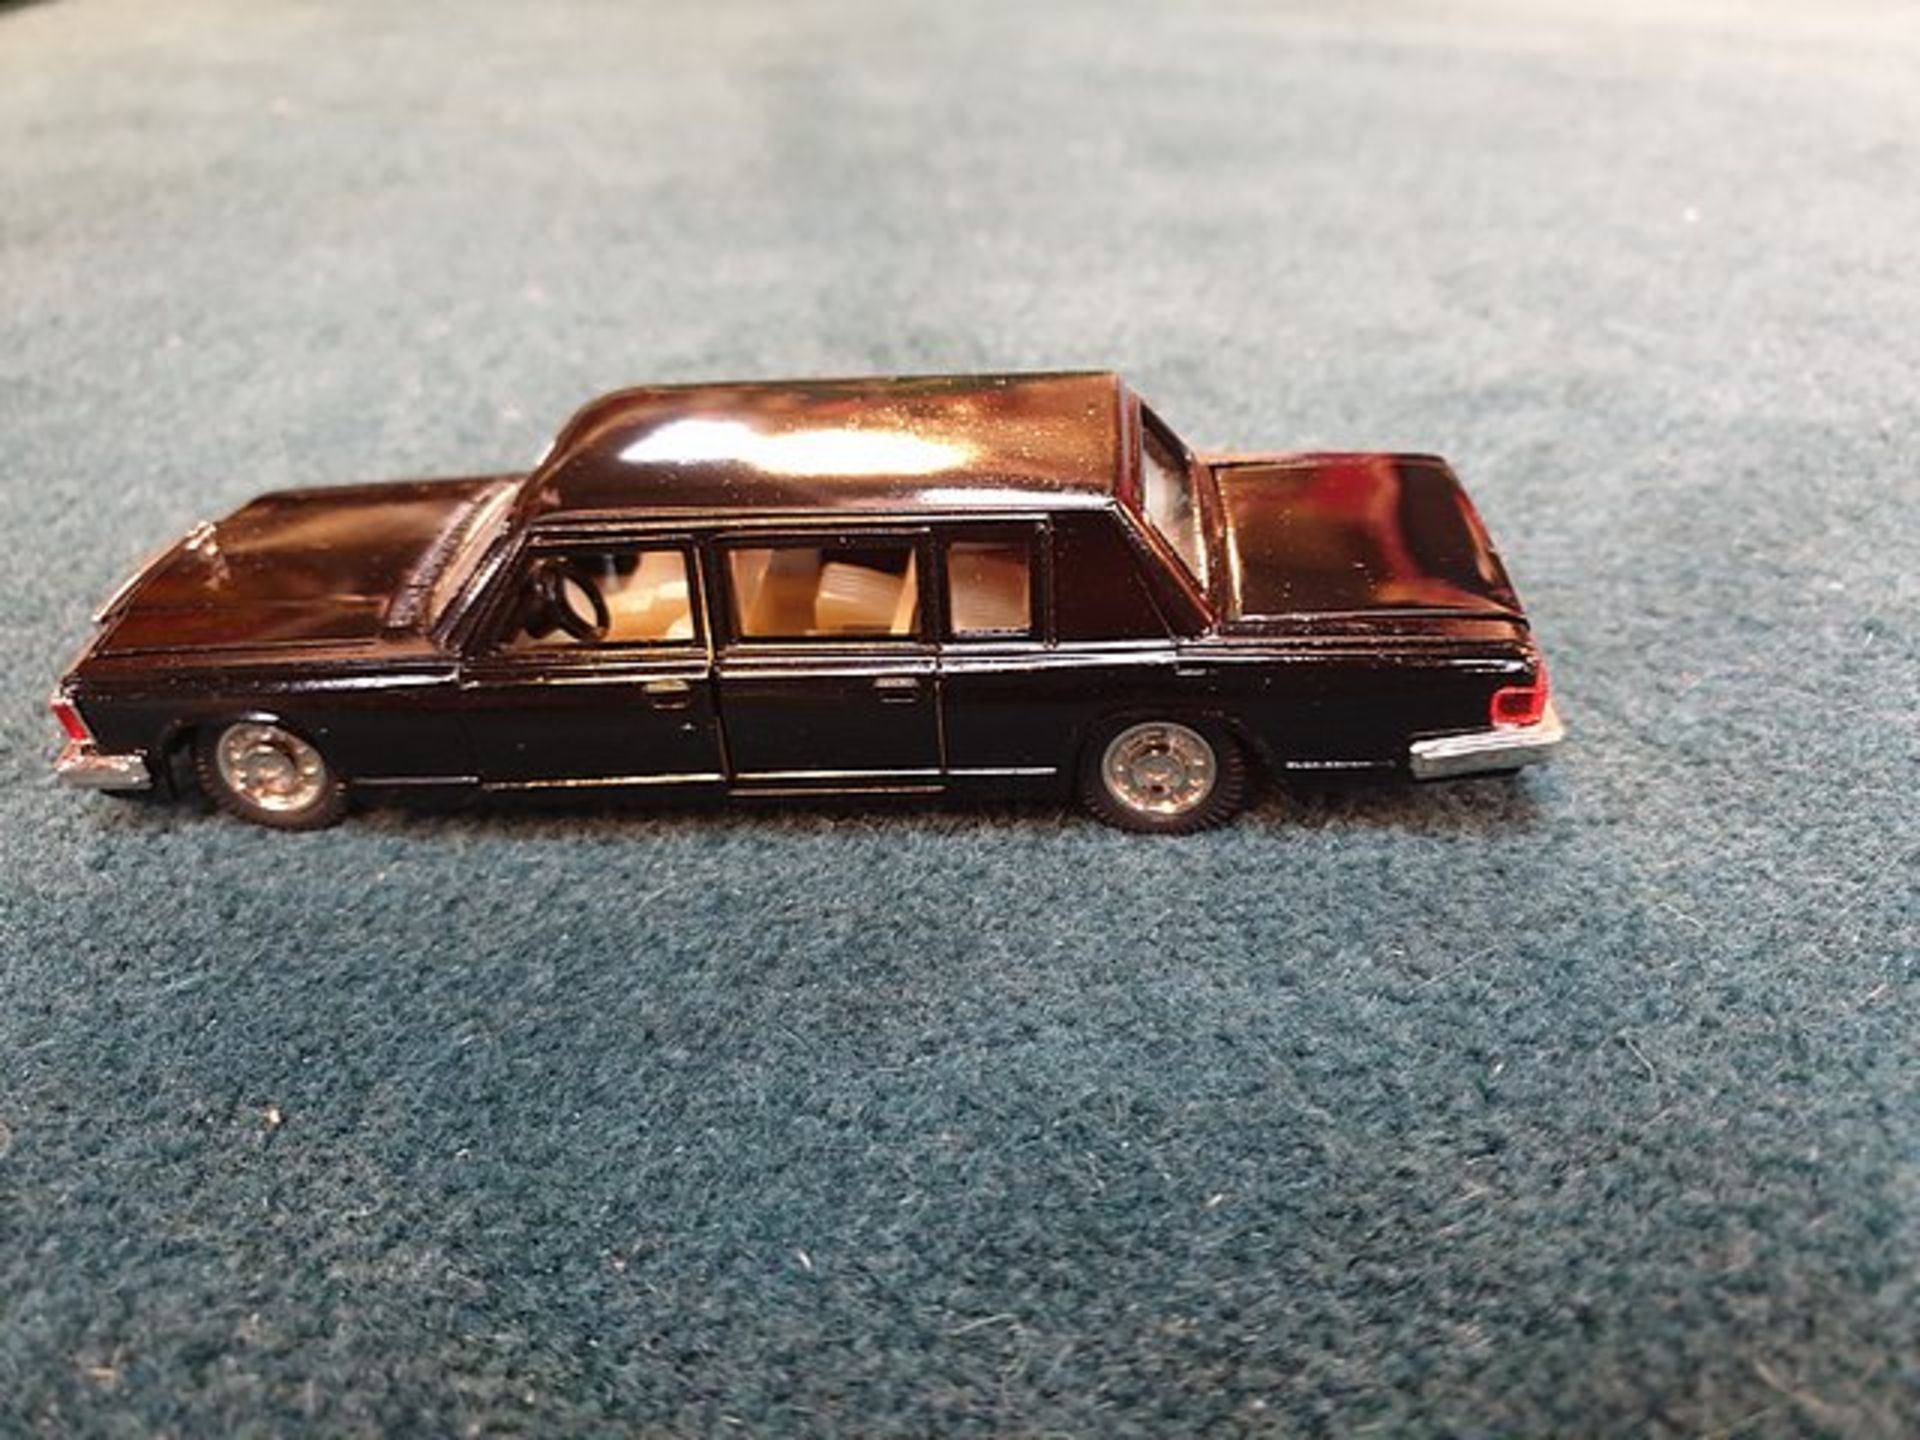 Novoexport (Russia) Diecast Made In USSR Russian ZIL.115 Limousine Scale 1/43 Boxed - Image 2 of 4